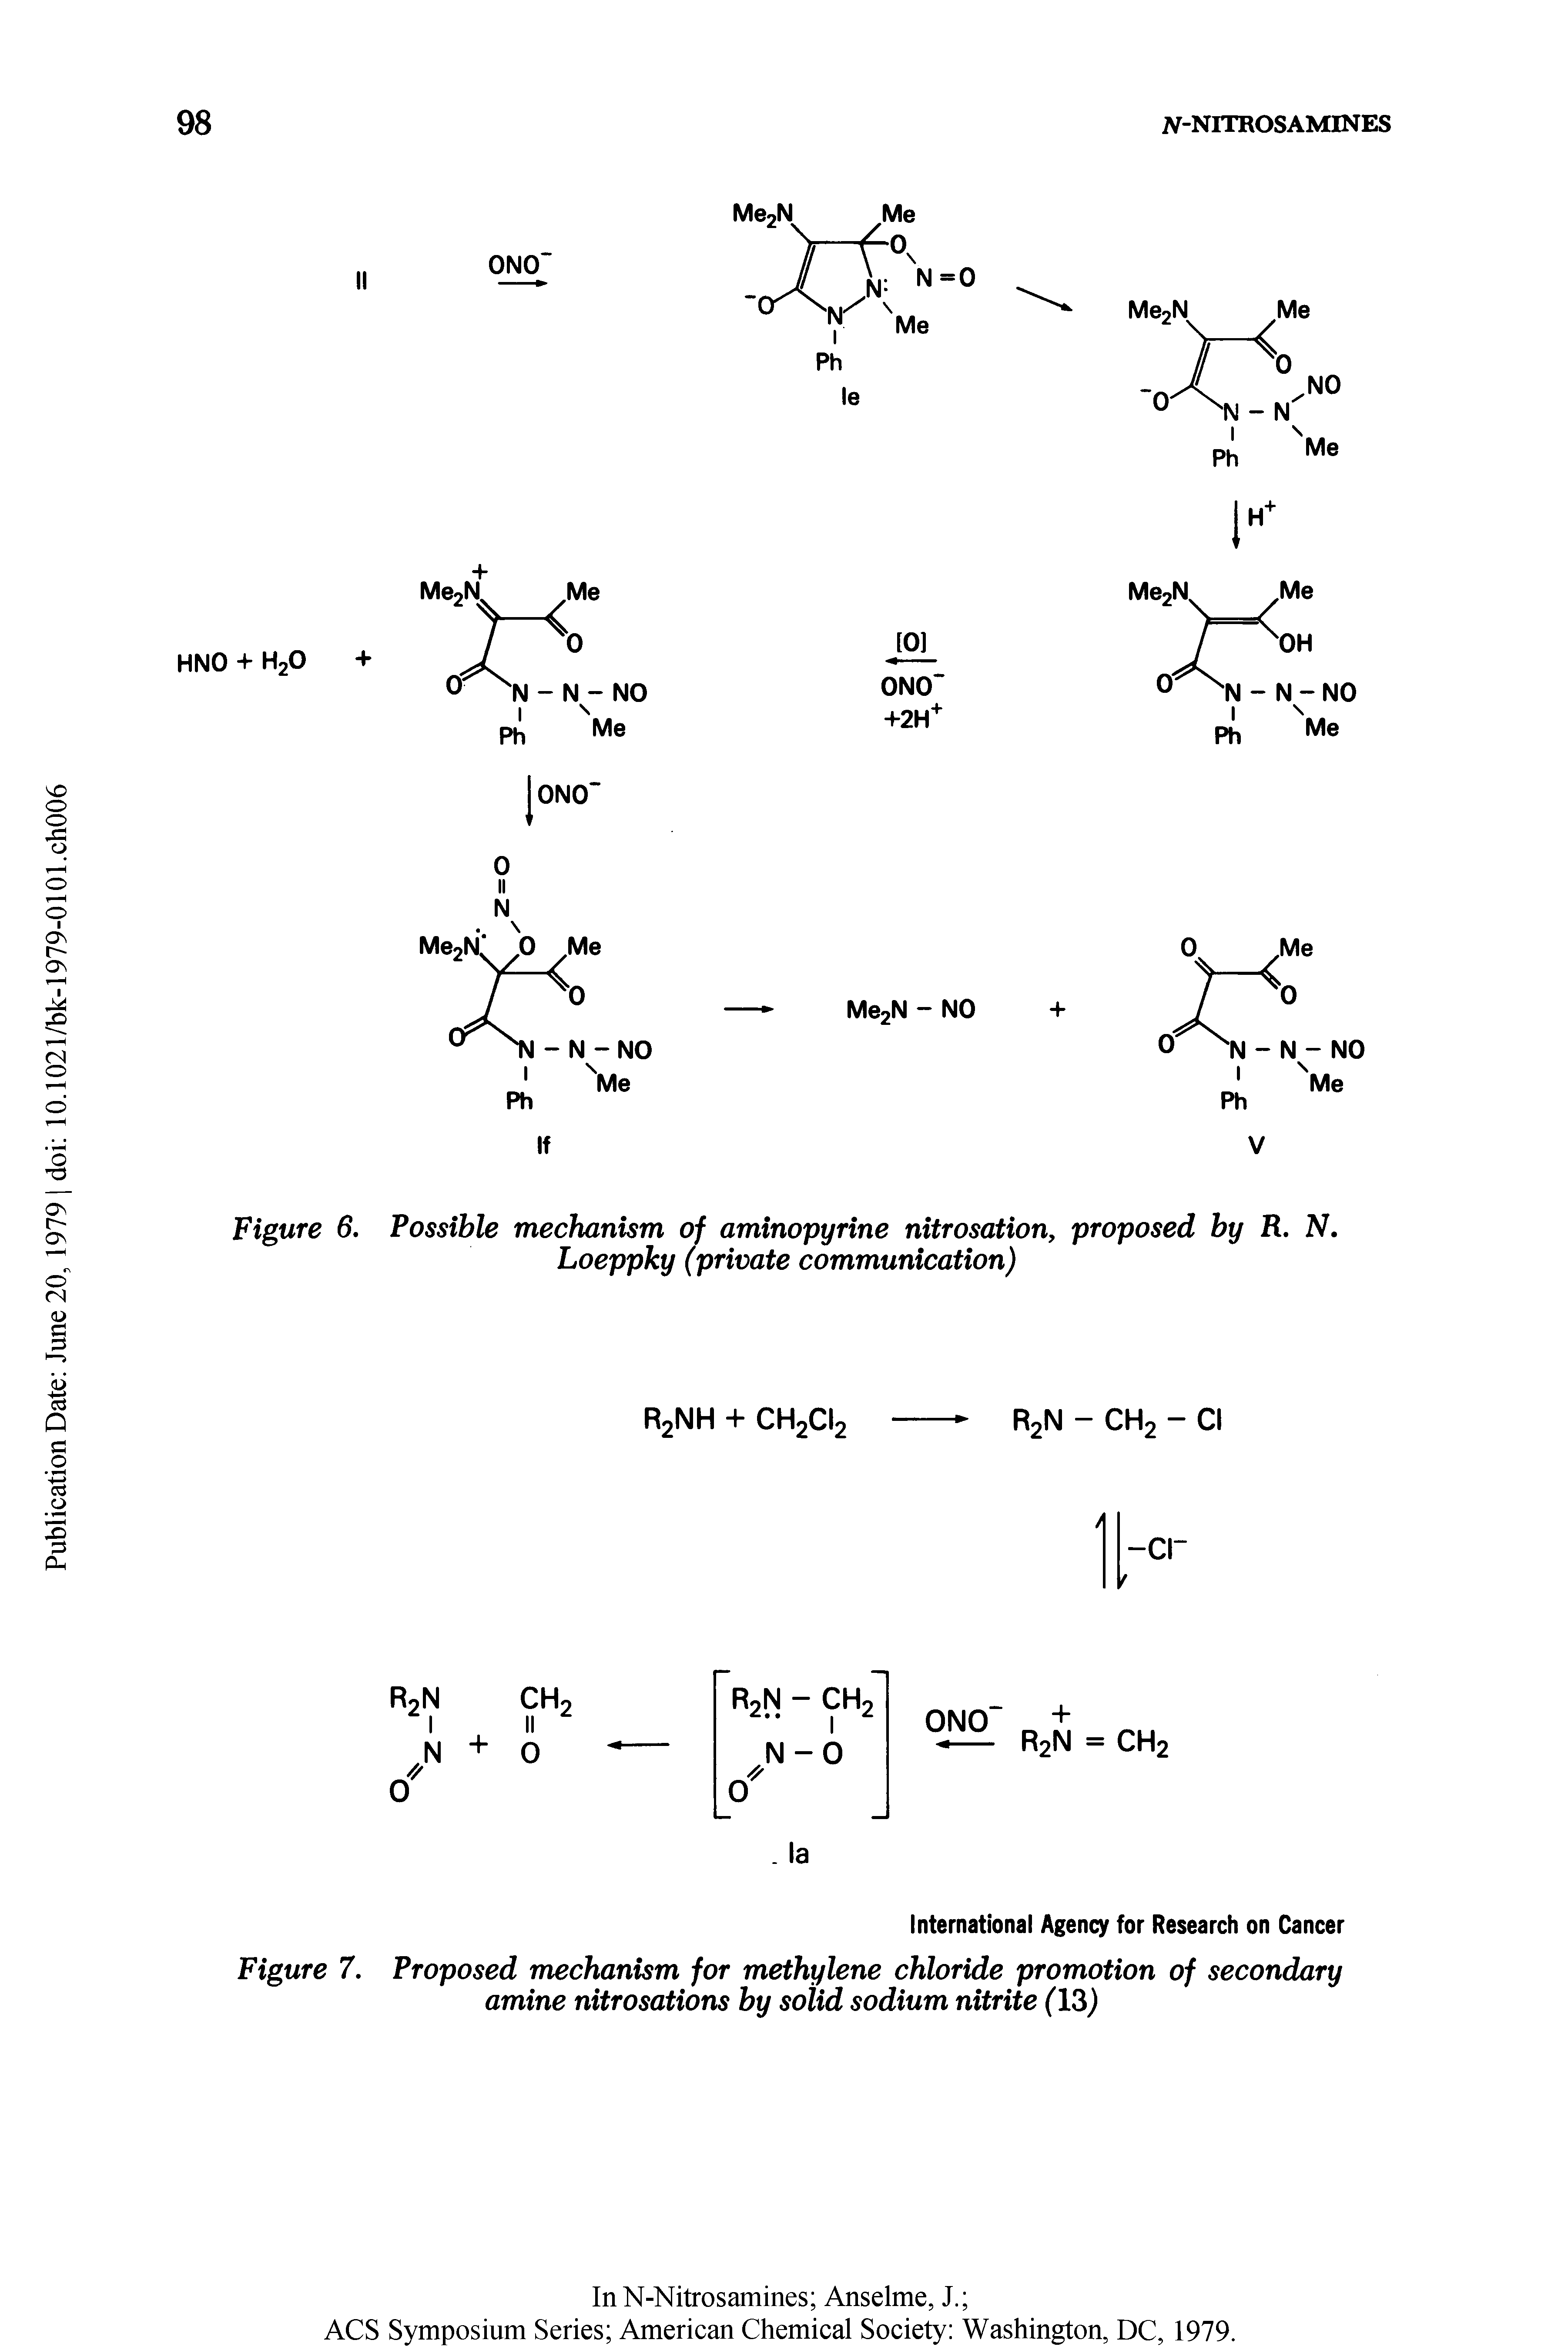 Figure 7. Proposed mechanism for methylene chloride promotion of secondary amine nitrosations by solid sodium nitrite (13)...